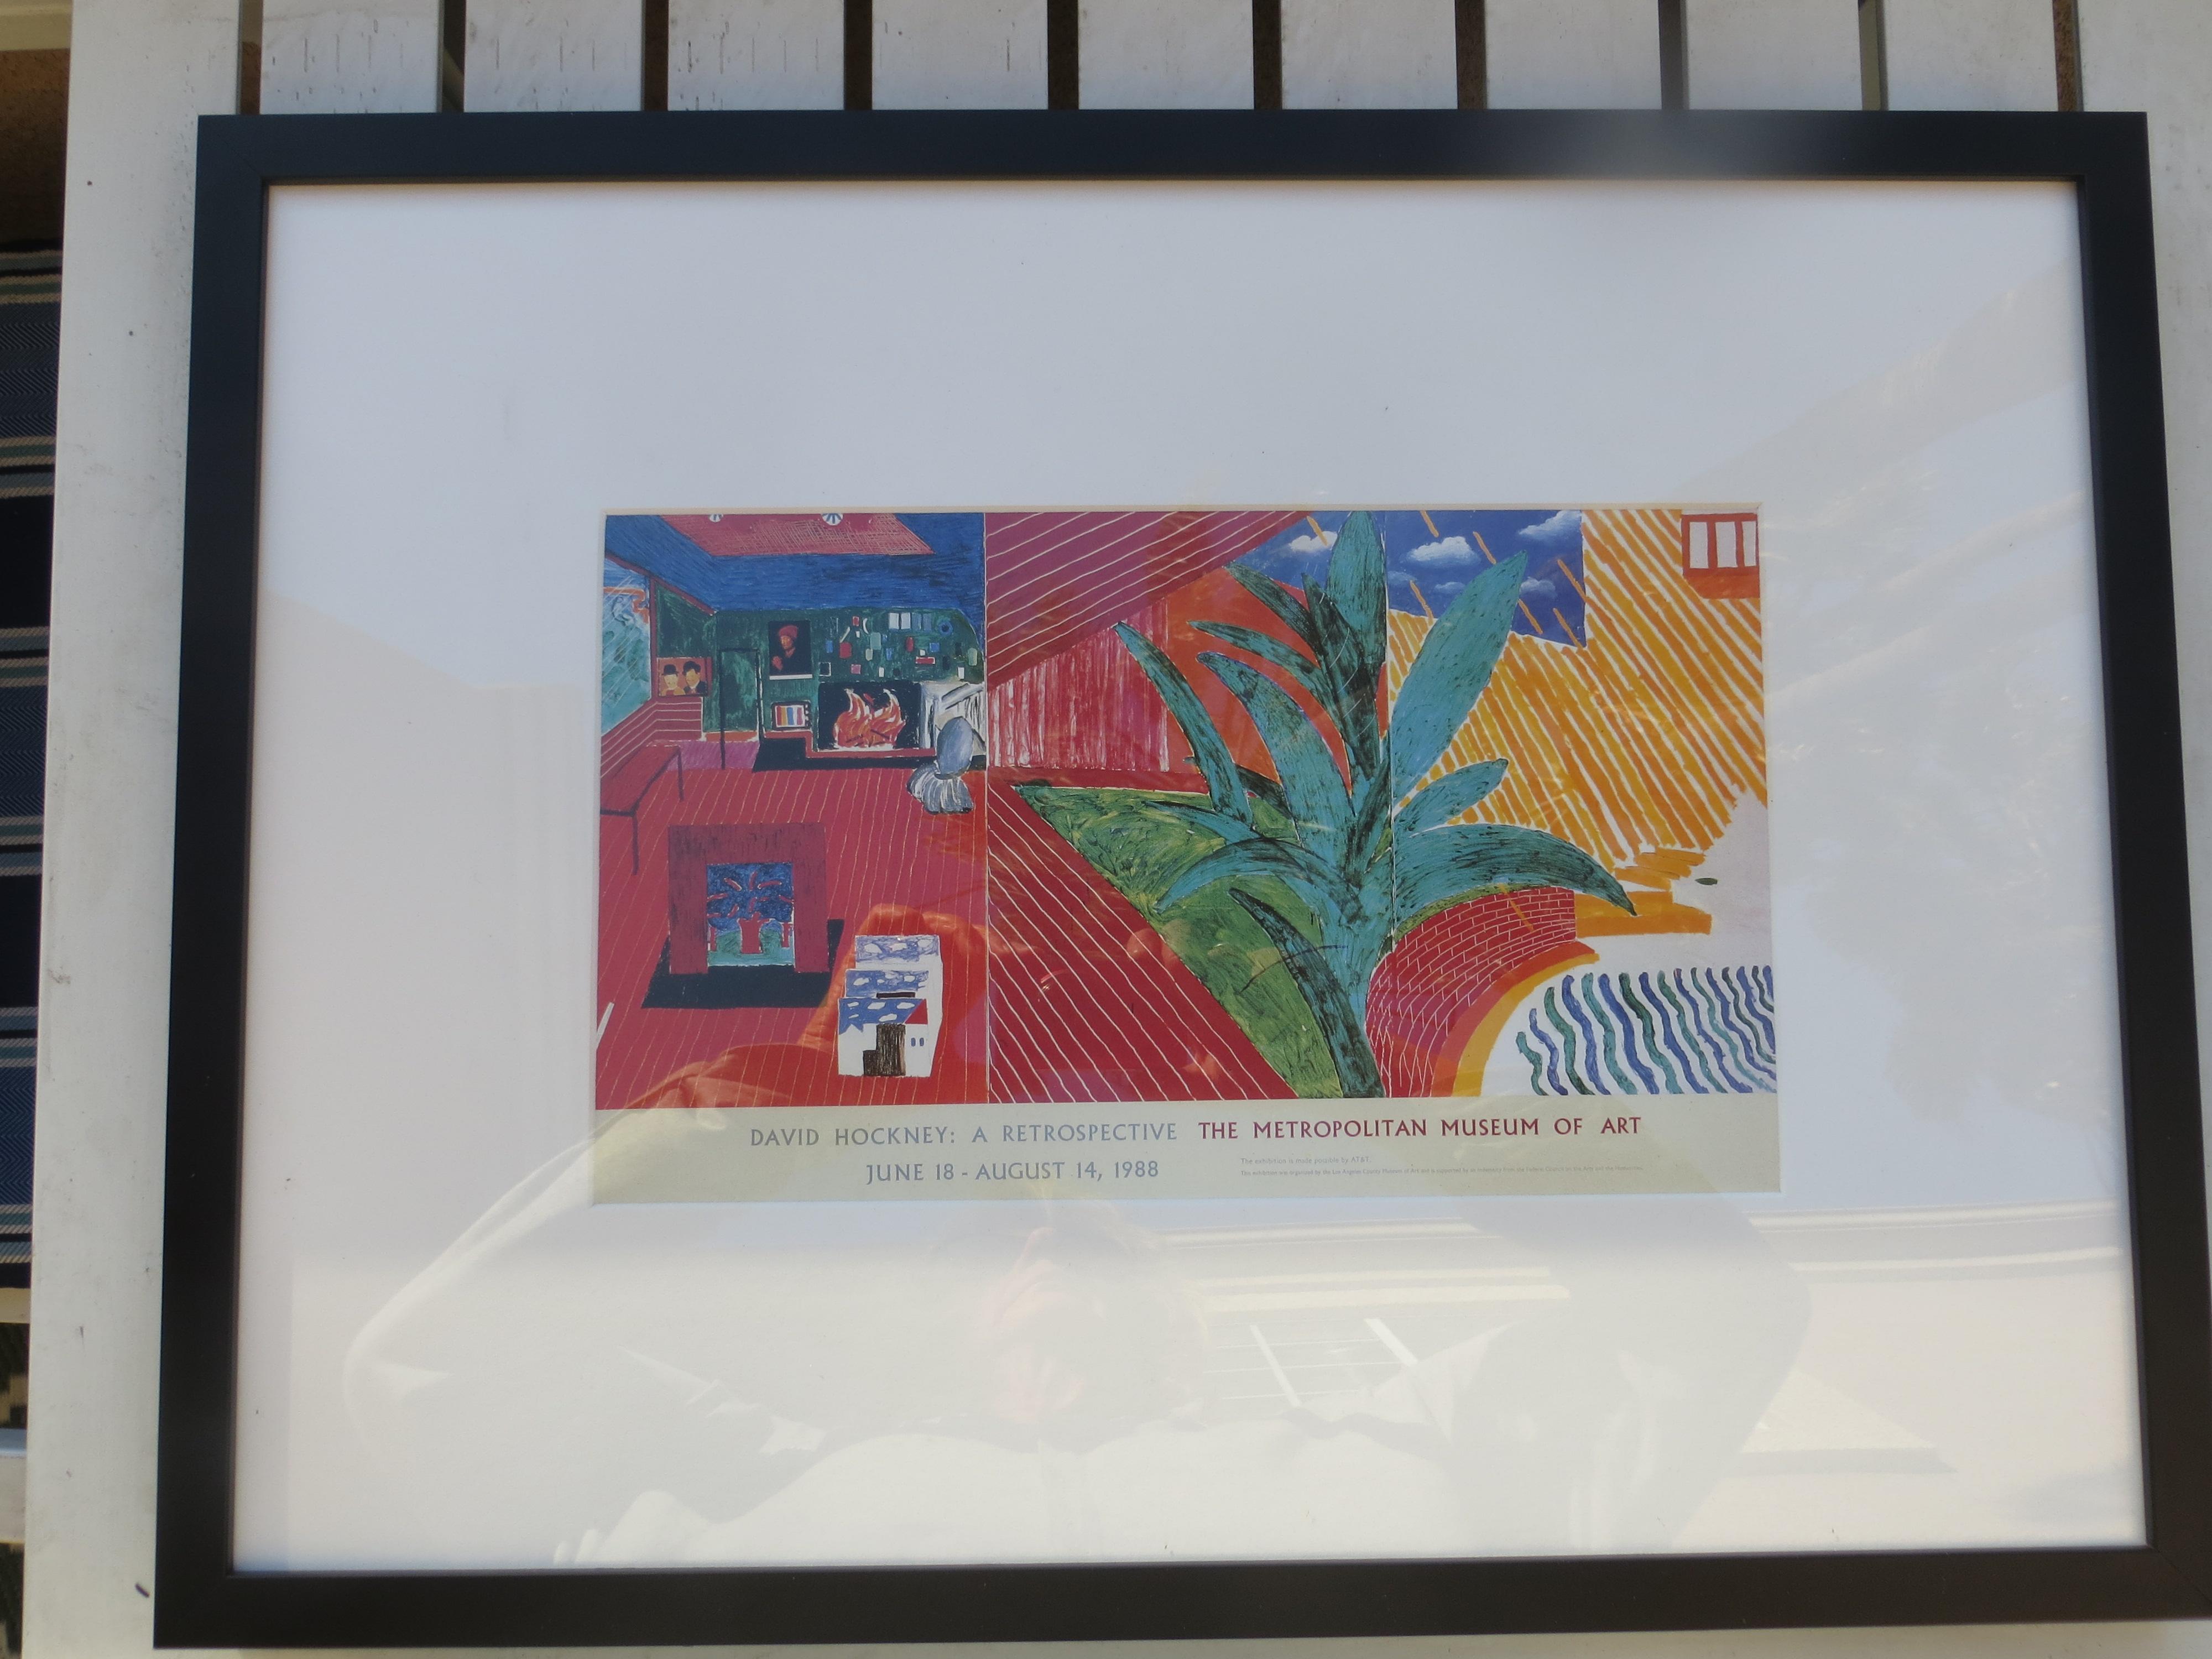 David Hockney, Original print, A Retrospective Exhibition 1988, small poster.
David Hockney ( B. 1937 ) is an English painter, draftsman, printmaker, stage designer, and photographer. He is an important contributor to The Pop Art Movement of the